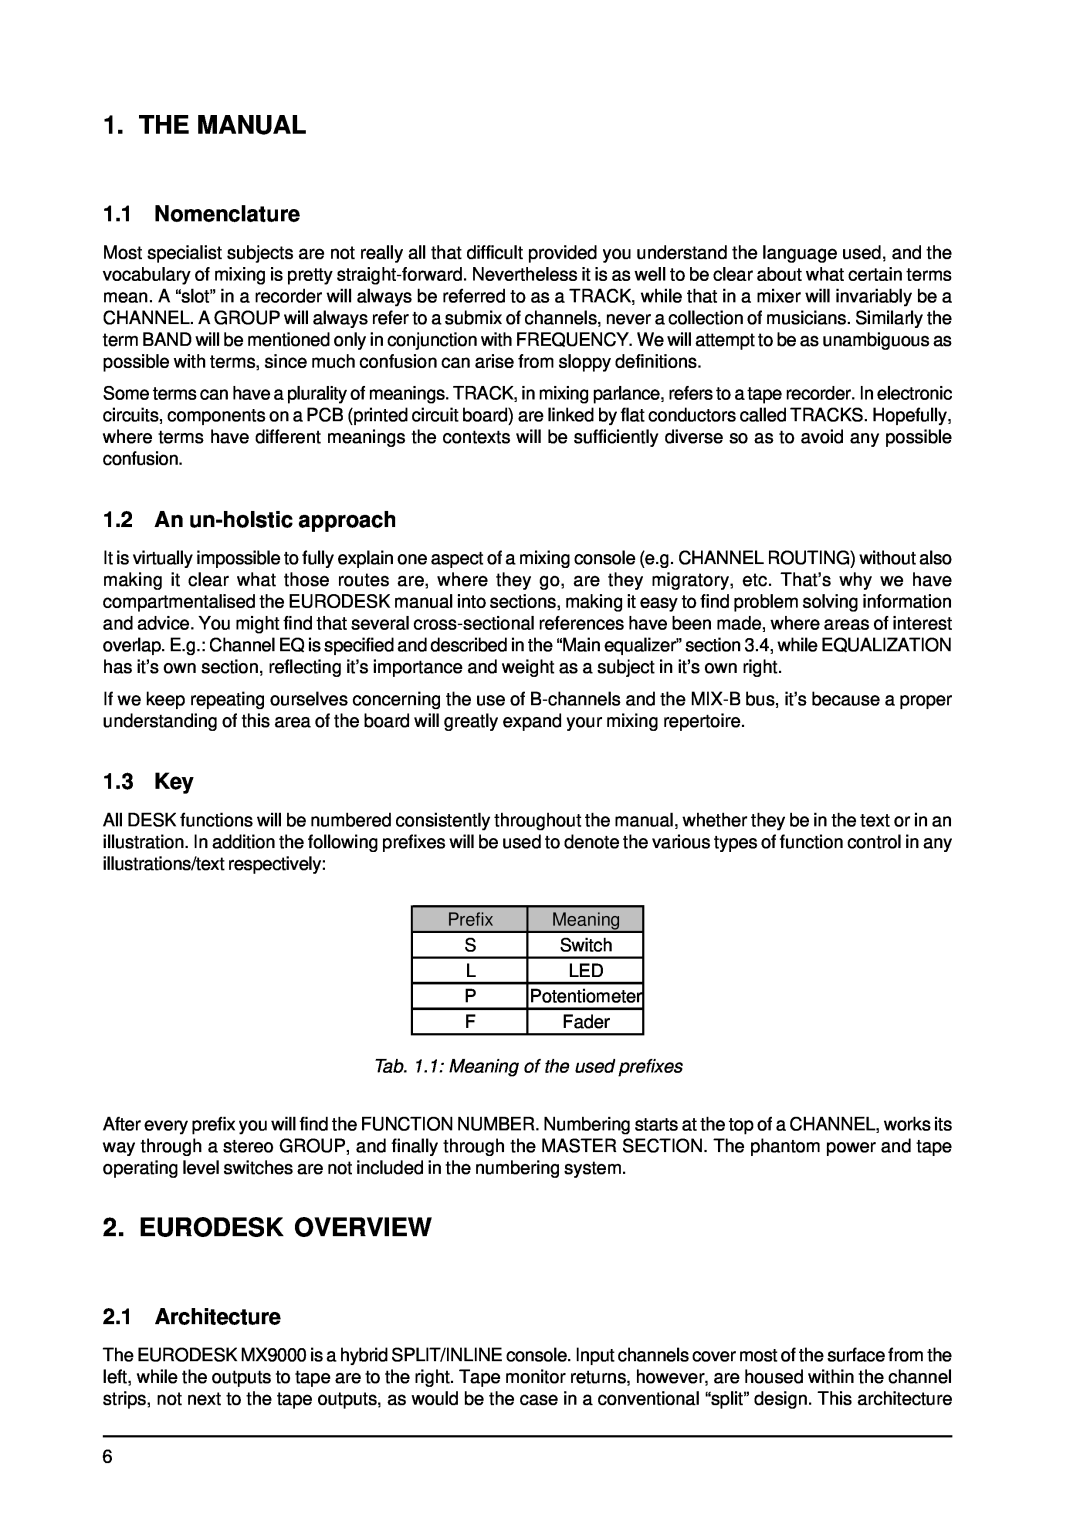 Behringer MX9000 user manual The Manual, Eurodesk Overview, Nomenclature, An un-holstic approach, 1.3 Key, Architecture 